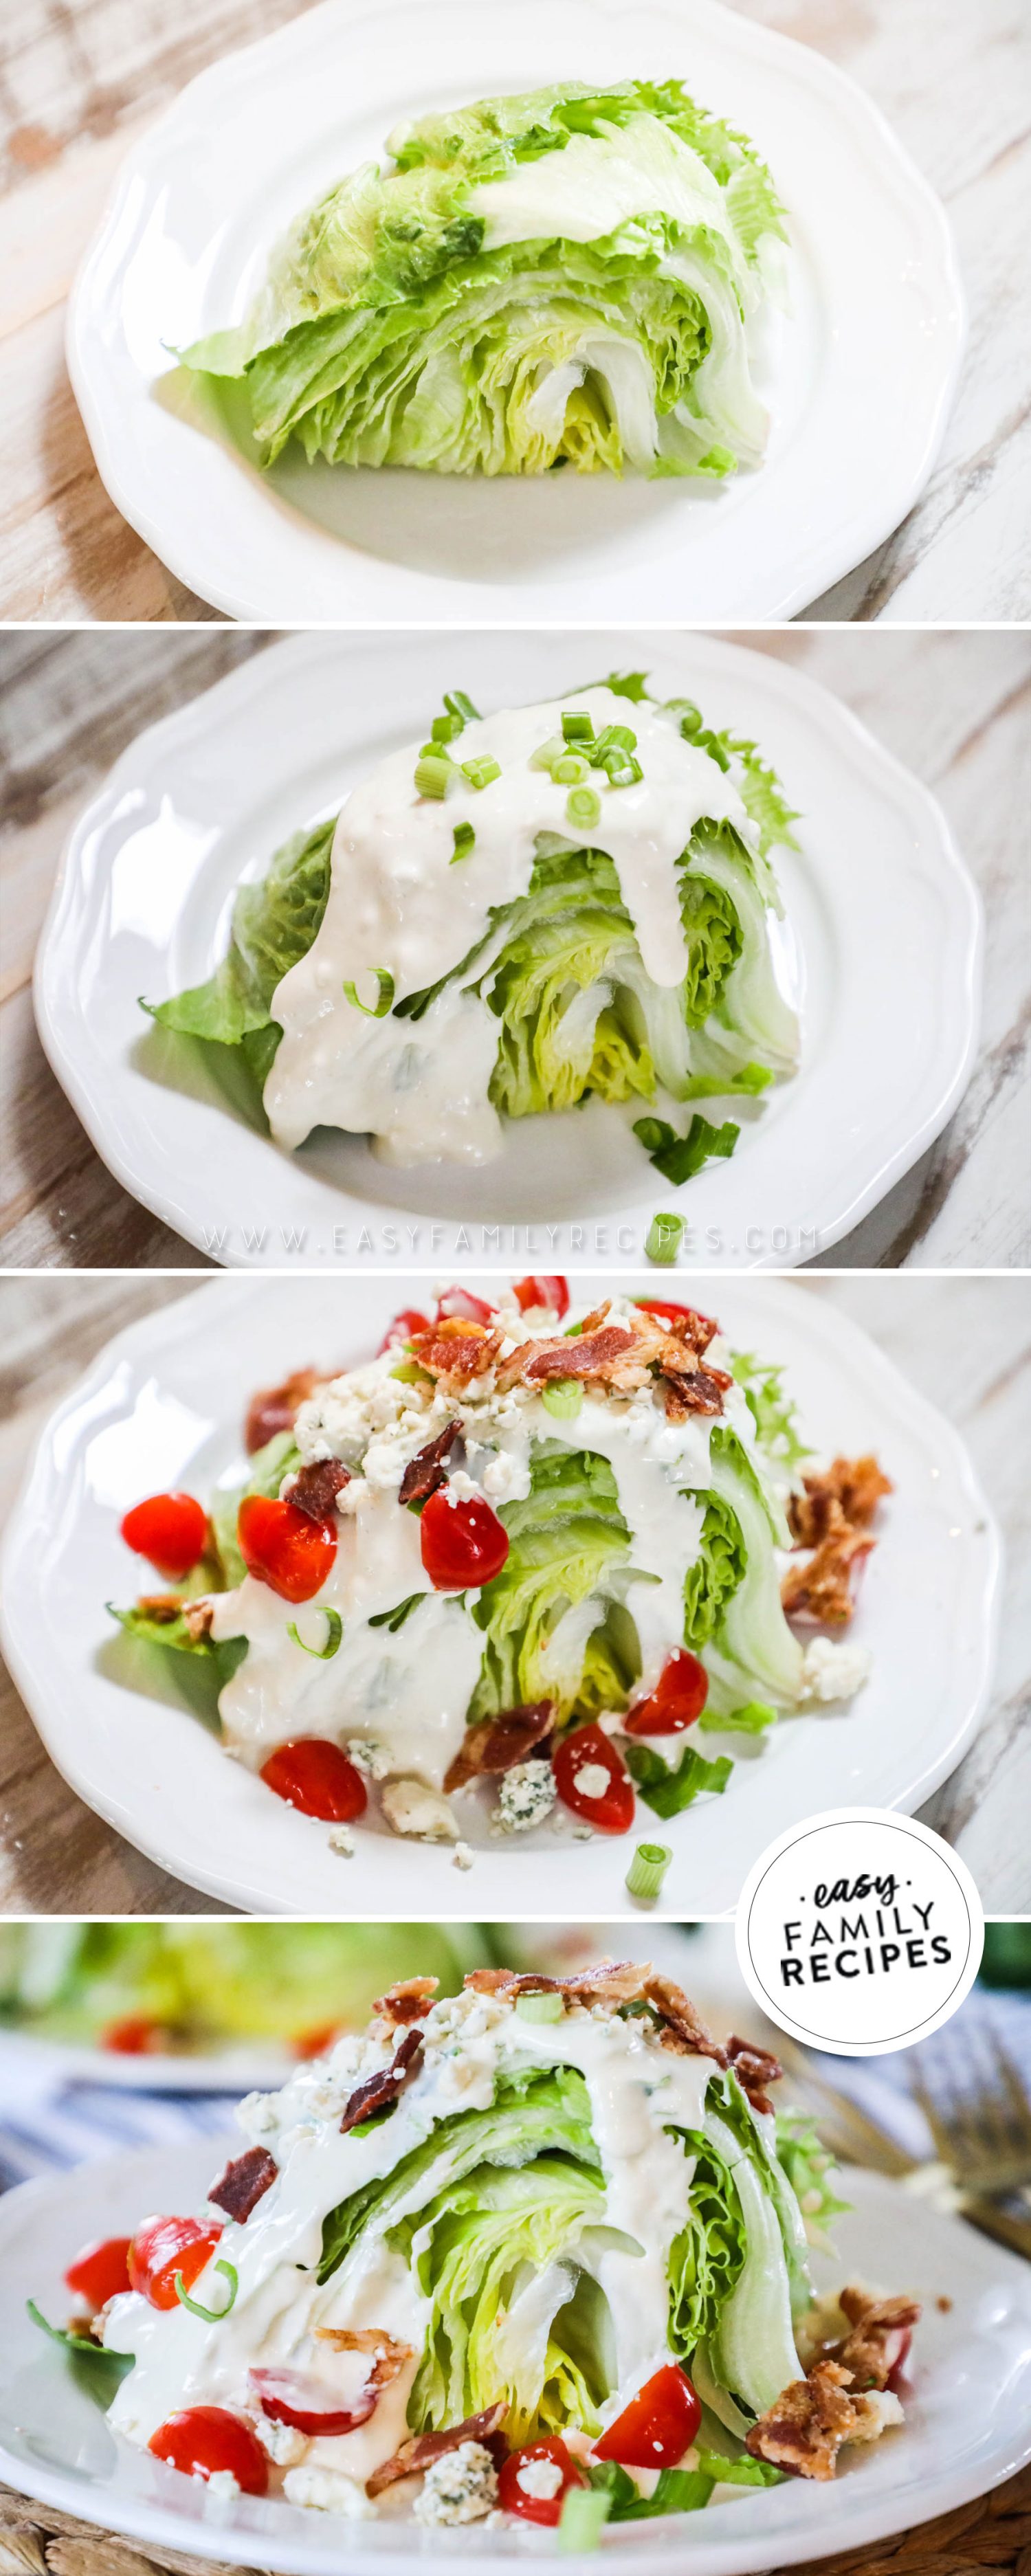 4 image vertical collage of making recipe: 1- quartered iceberg lettuce wedge on a plate, 2- dressing added on top, 3- cherry tomatoes, bacon, and blue cheese crumbles added, 4- finished wedge salad being served.